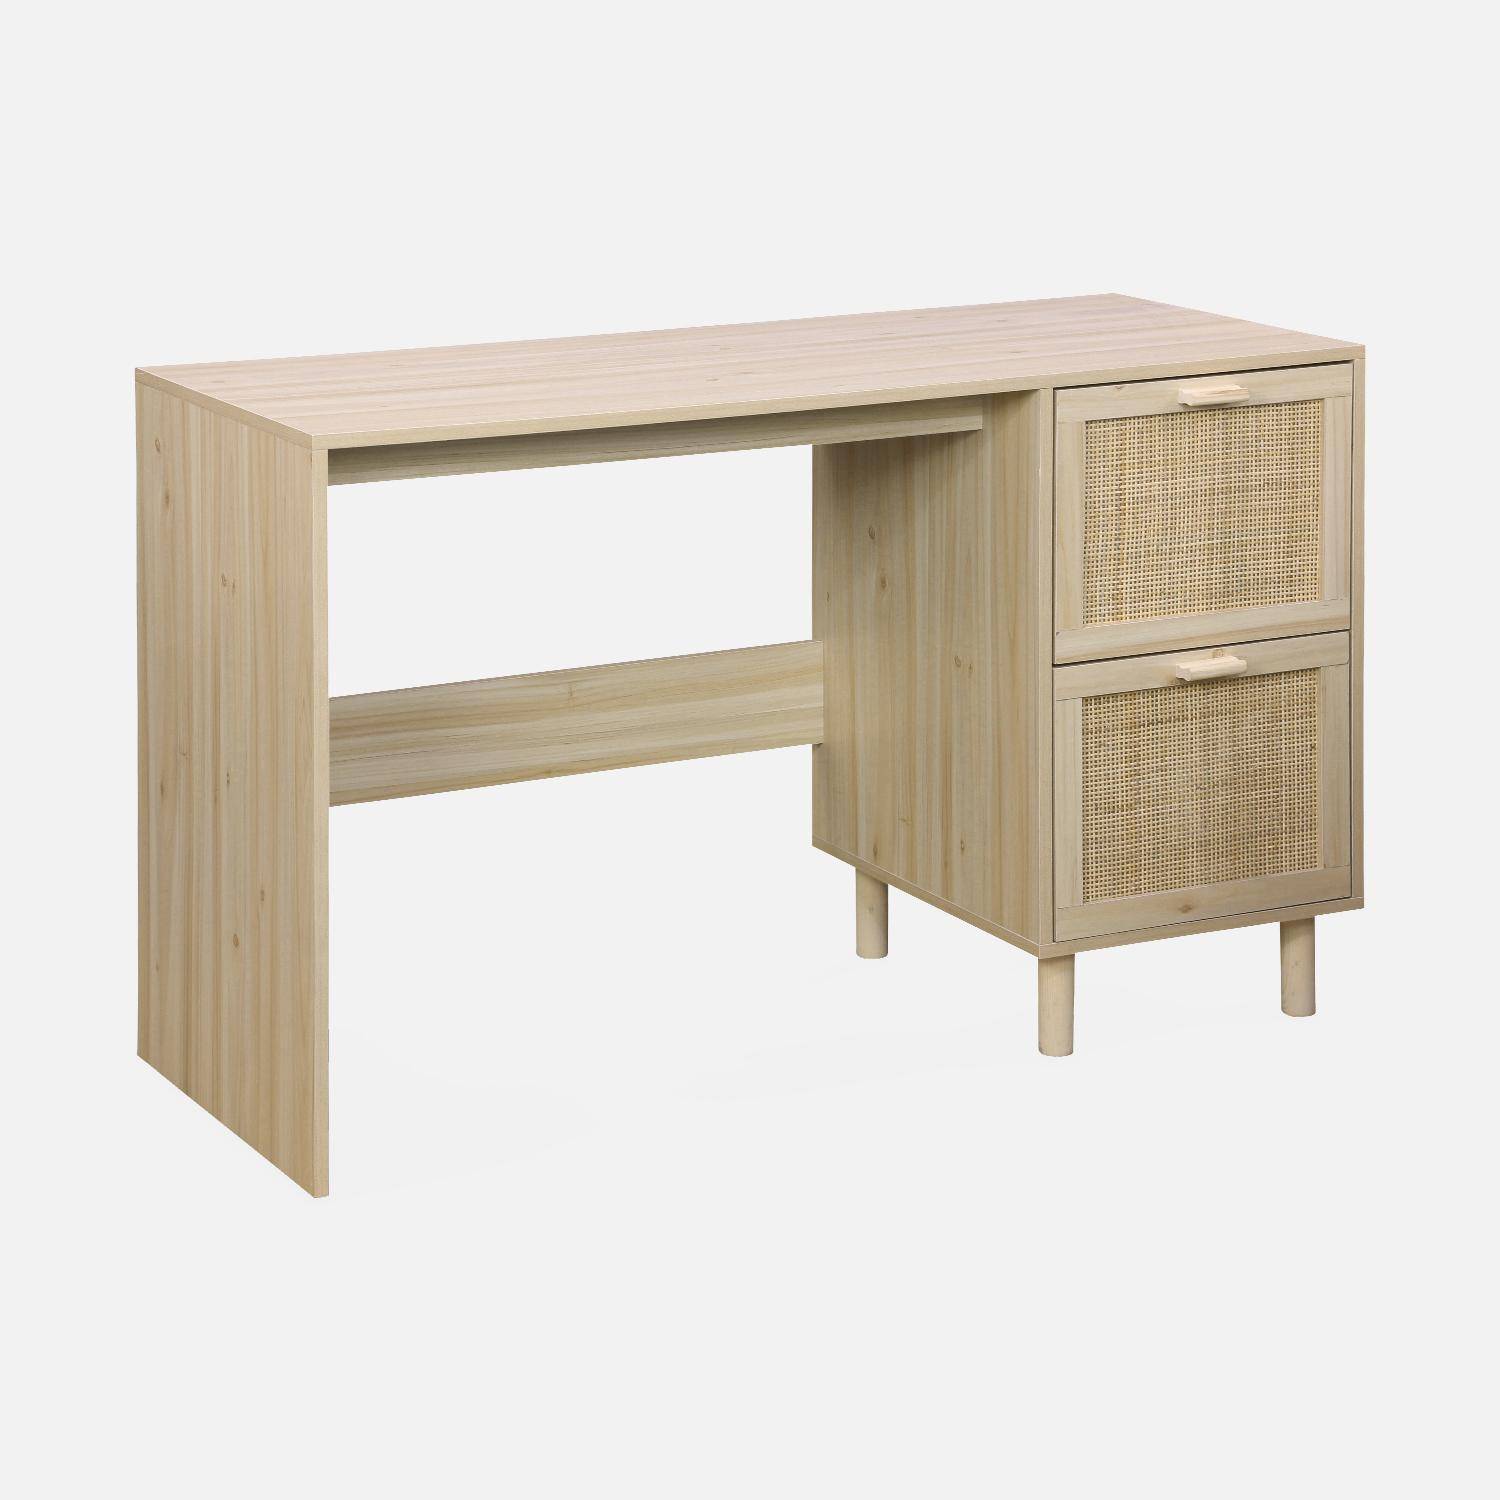 Woven rattan desk with 2 drawers, 120x48x75cm - Camargue - Natural,sweeek,Photo3